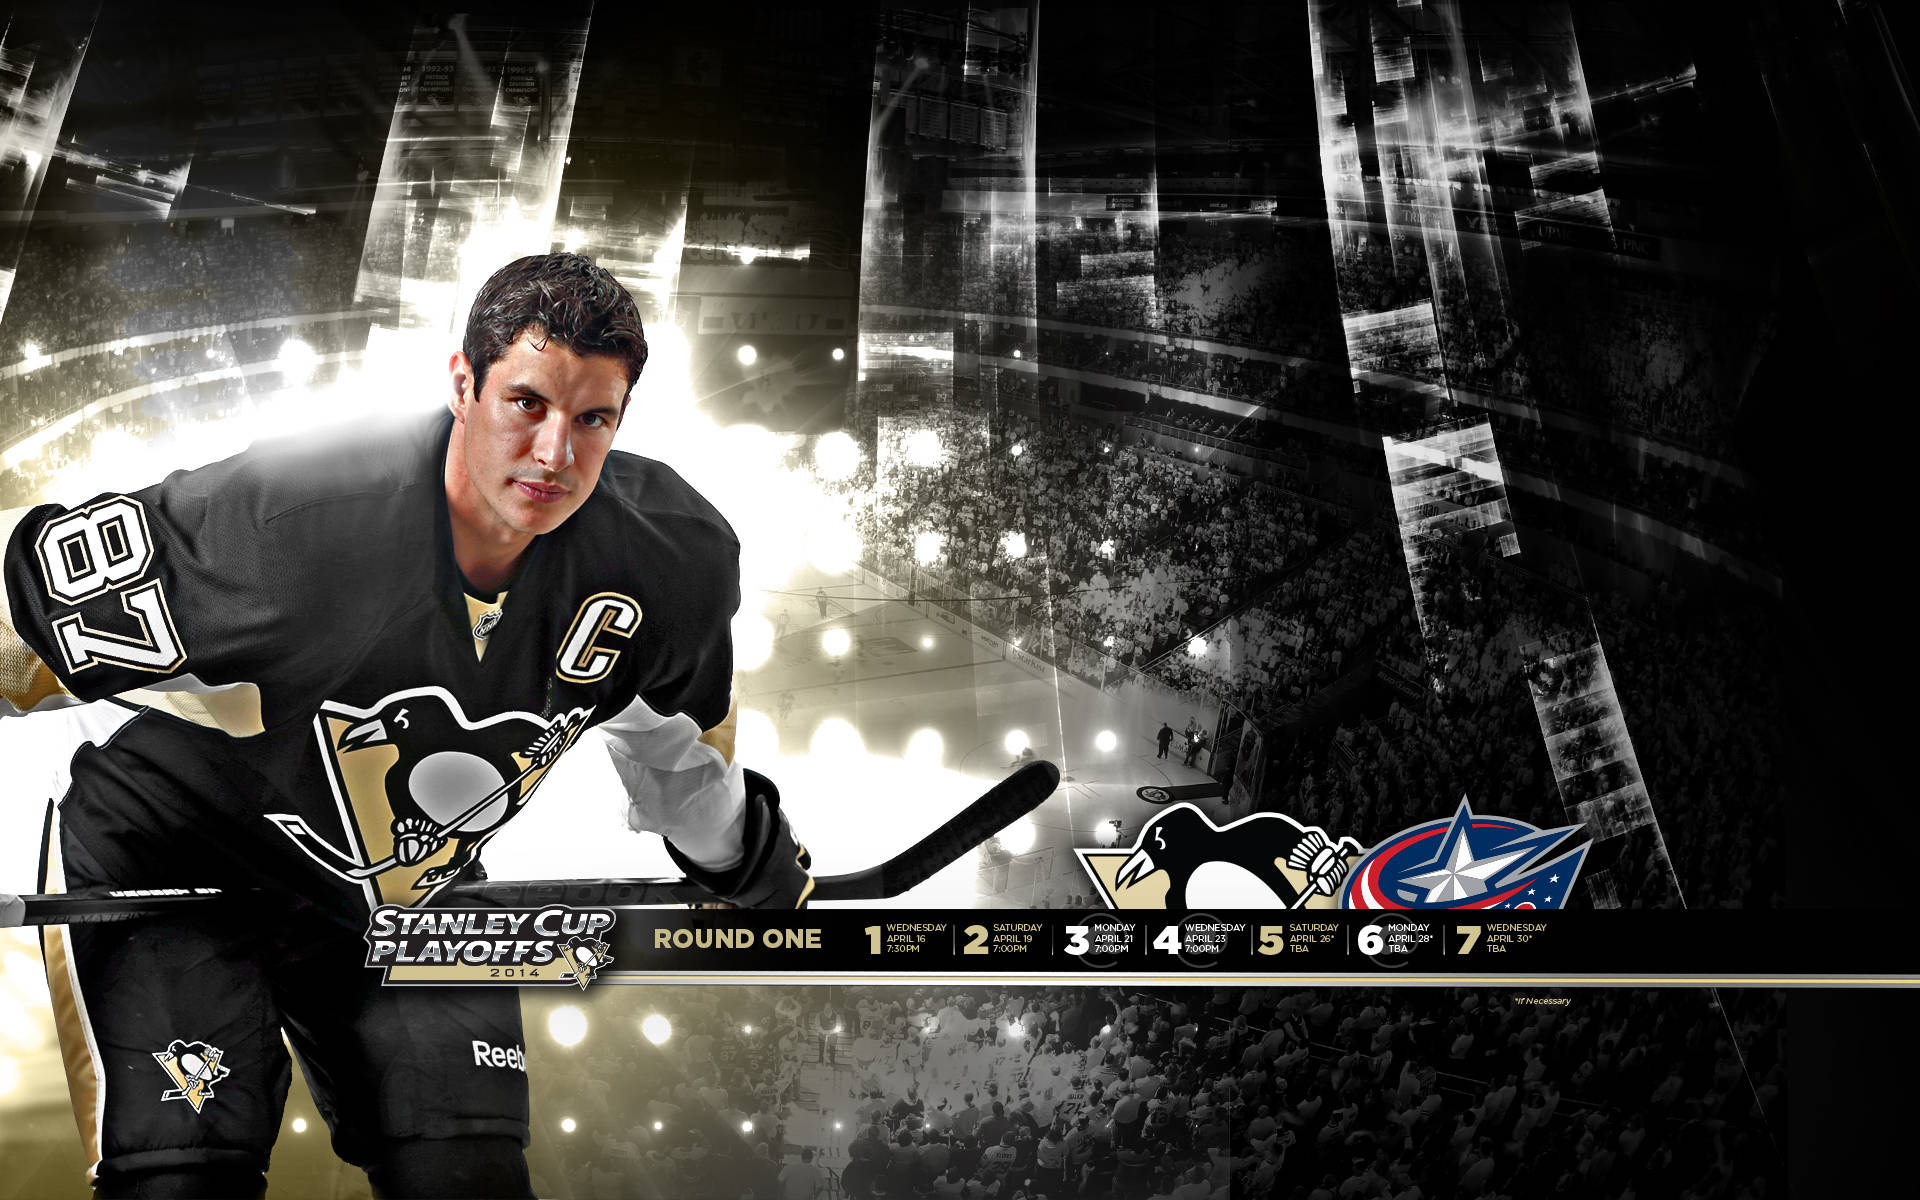 (based On Context Of Computer/mobile Wallpaper Featuring Crosby Of The Pittsburgh Penguins Hockey Team) Wallpaper